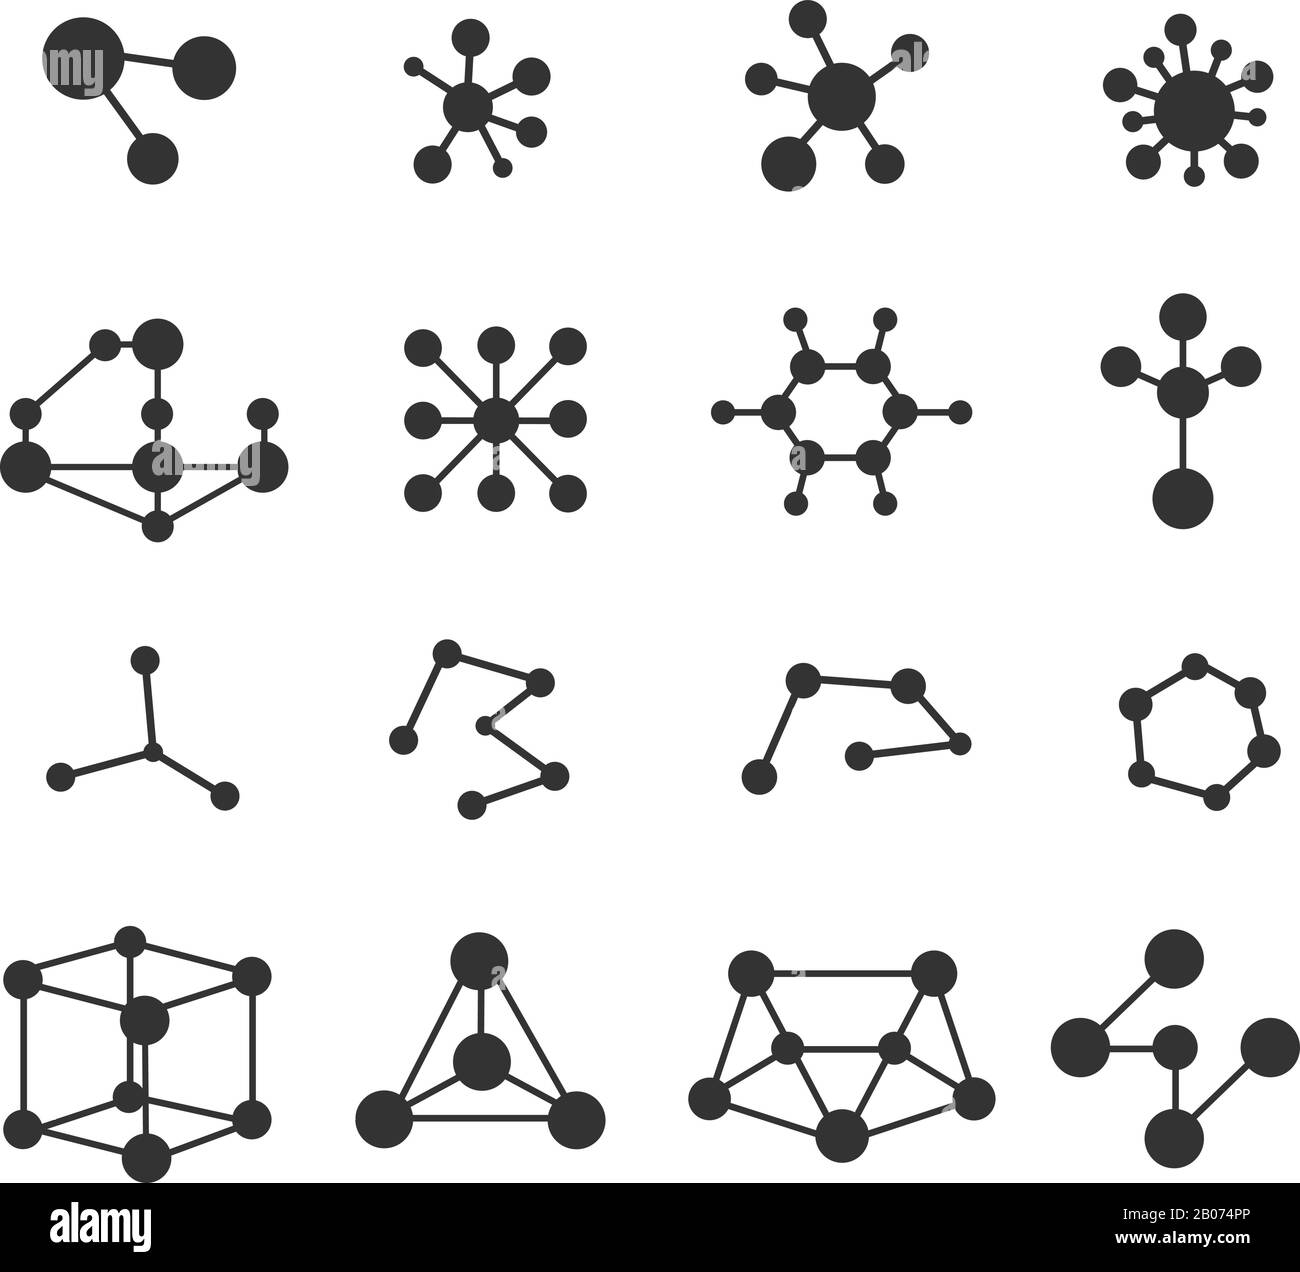 Molecules icons vector set. Atom research and chemical structure illustration Stock Vector